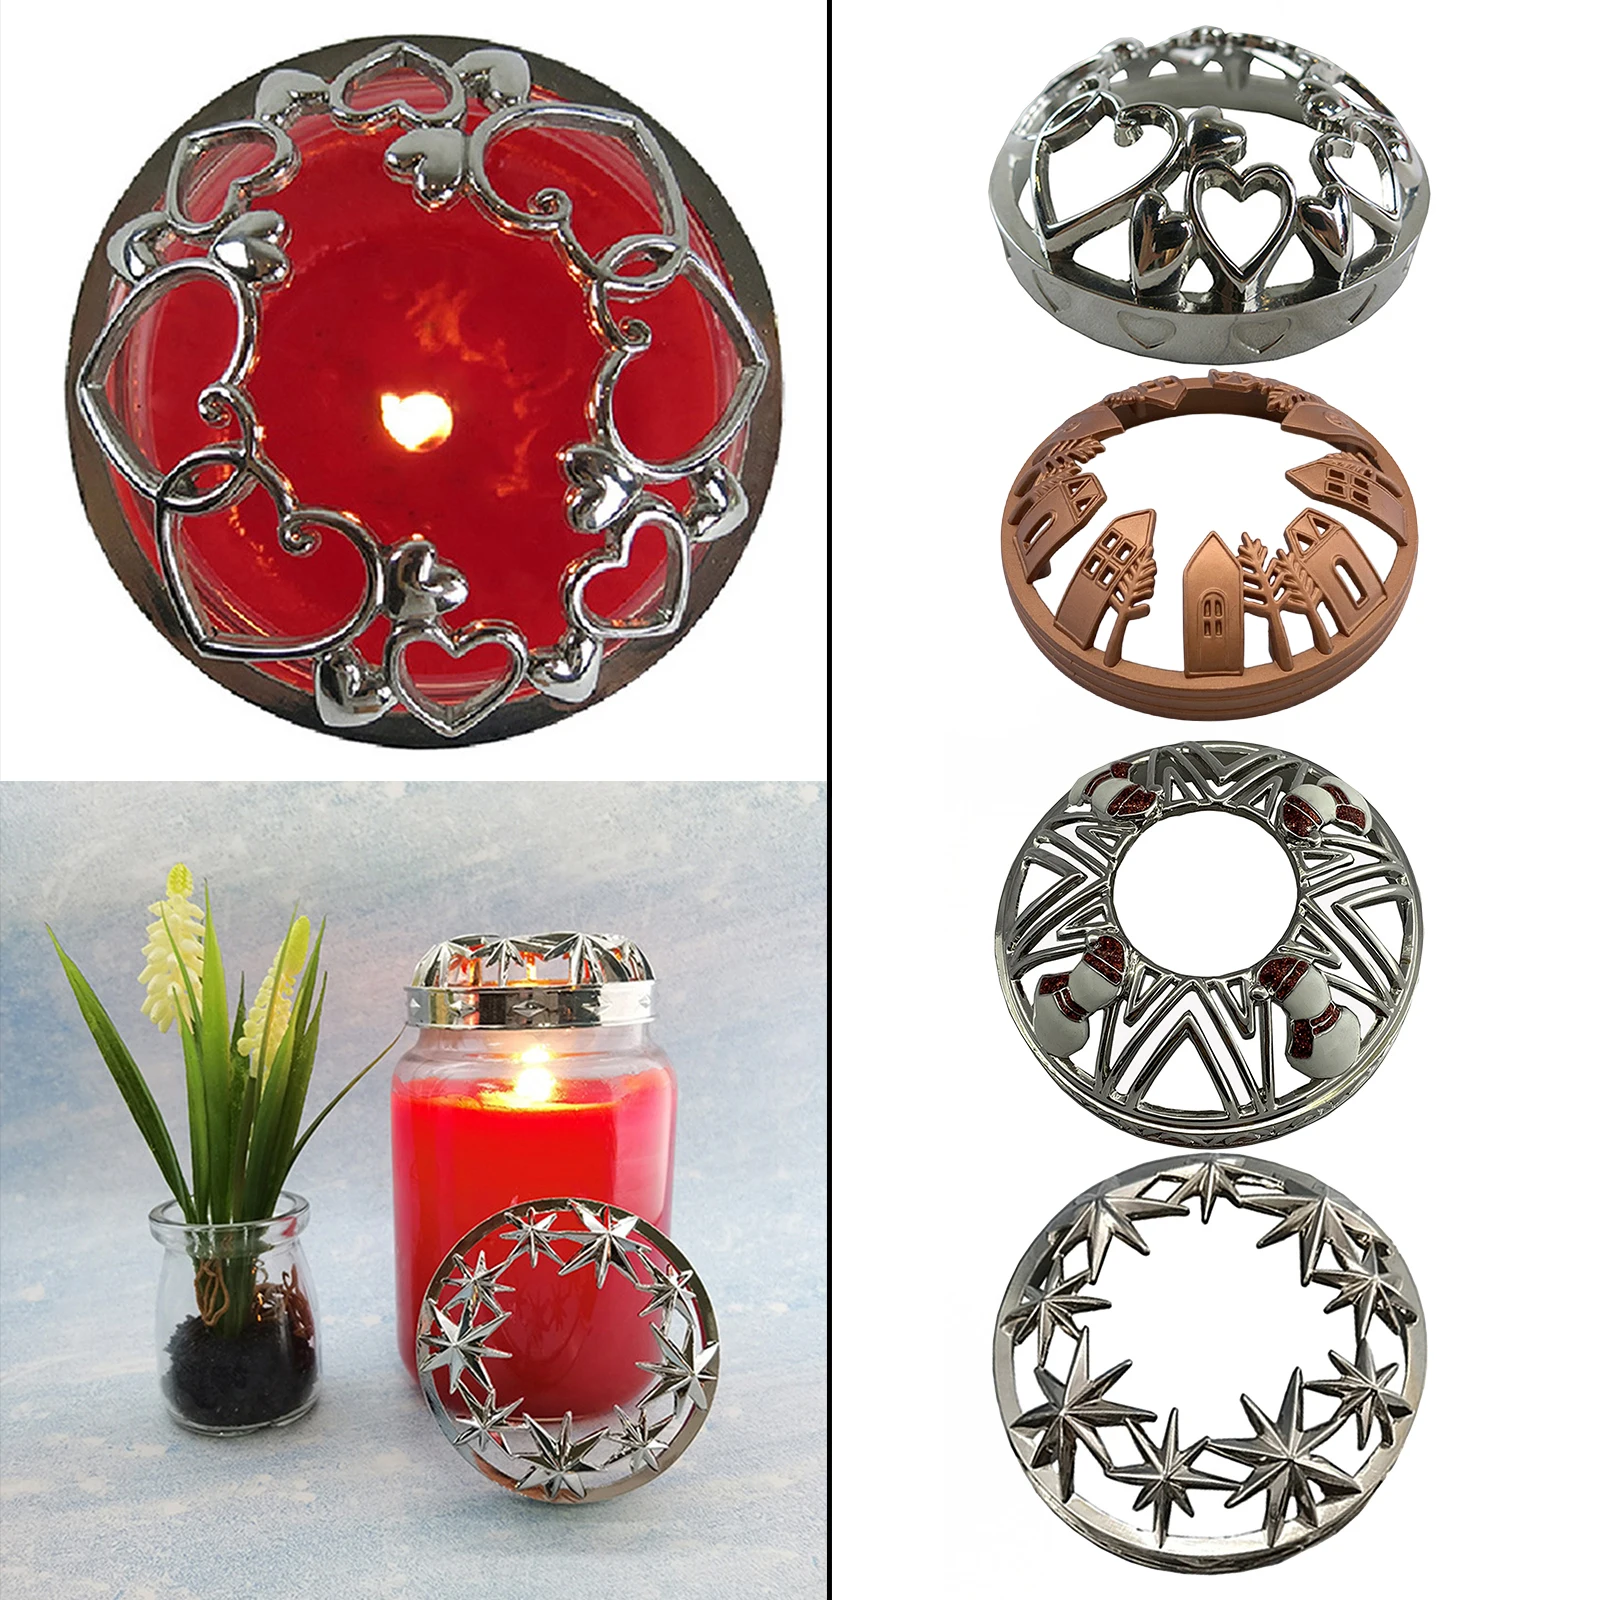 Candles Jar Cover Vintage Tea Light Candle Lids Jar Candles Topper Accessories Shades Sleeves for Jar Candles Home Decor